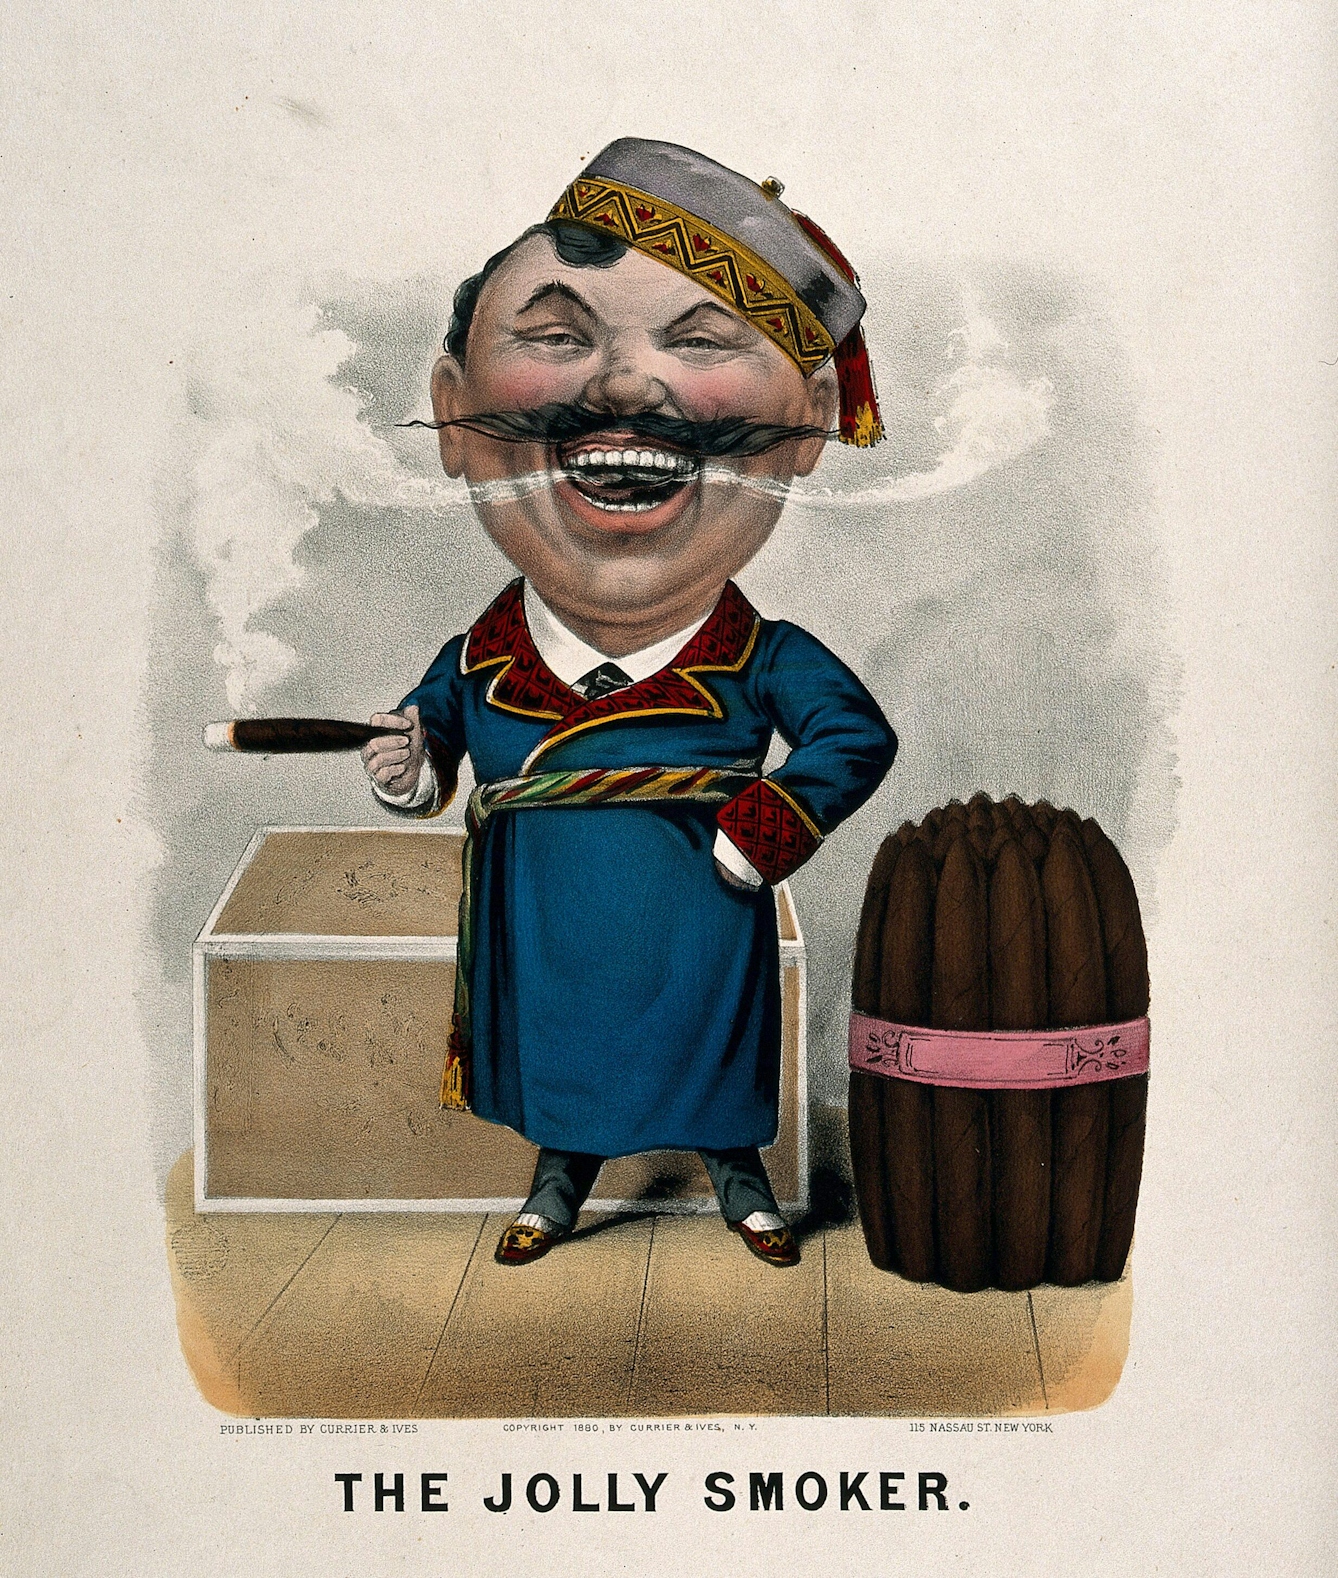 Colour illustration of "The Jolly Smoker" featuring a man with an extra large head exhaling smoke from an enormous cigar. The man has an extravagant moustache, and is wearing a hat and belted smoking jacket. He is smiling. He is standing beside a large bundle of giant cigars and in front of a large brown box.